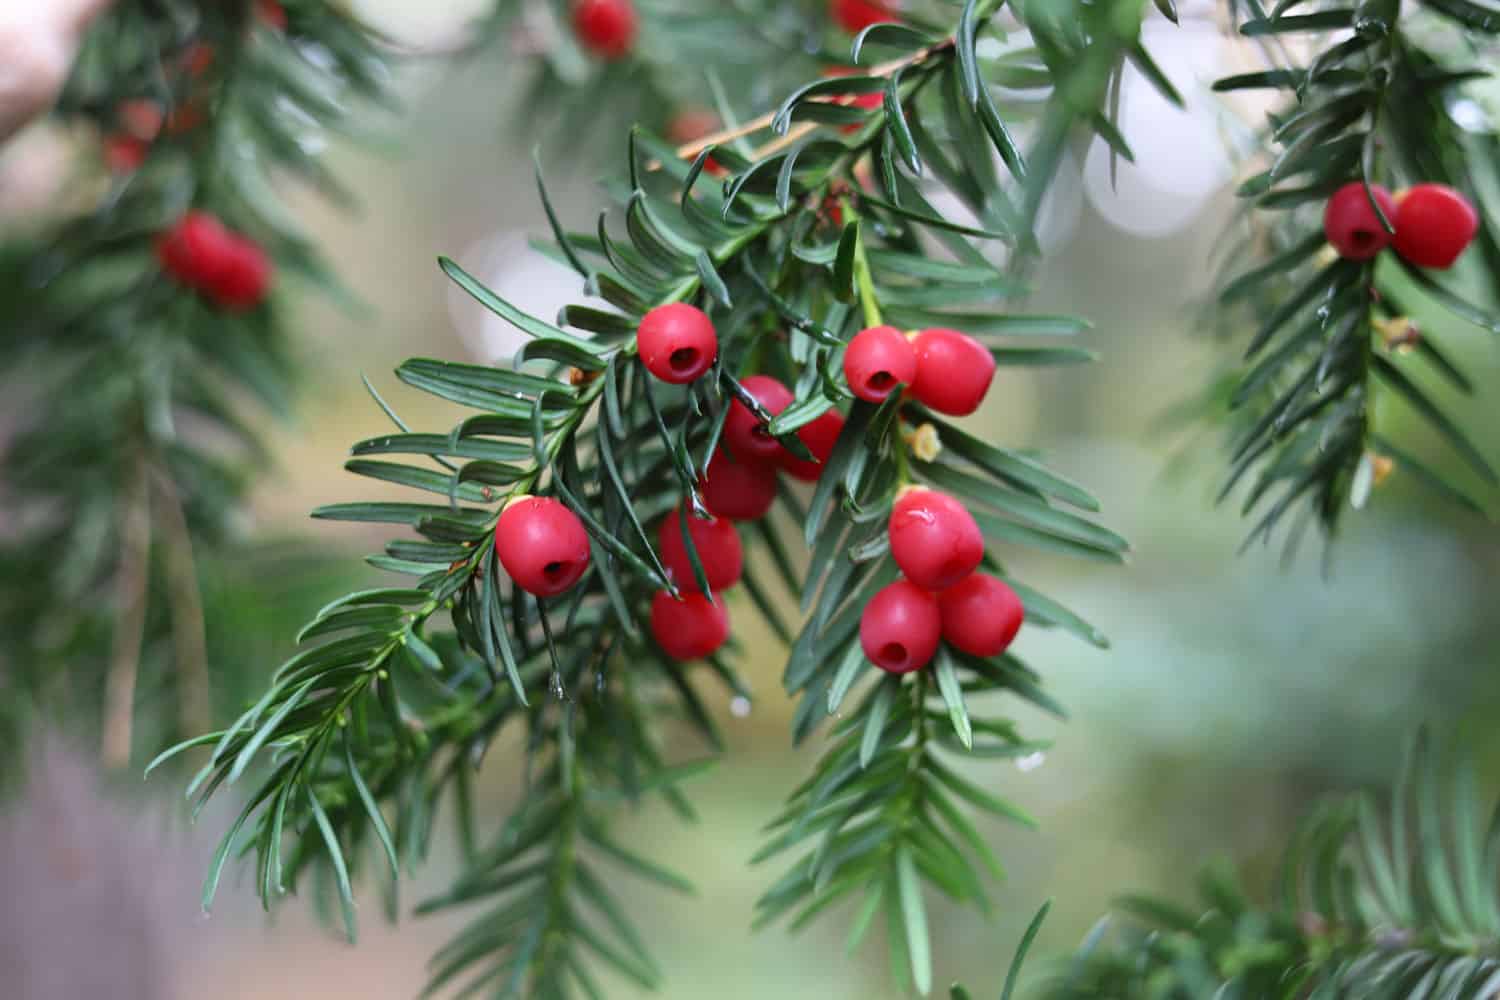 Blooming red bearings of a Yew tree